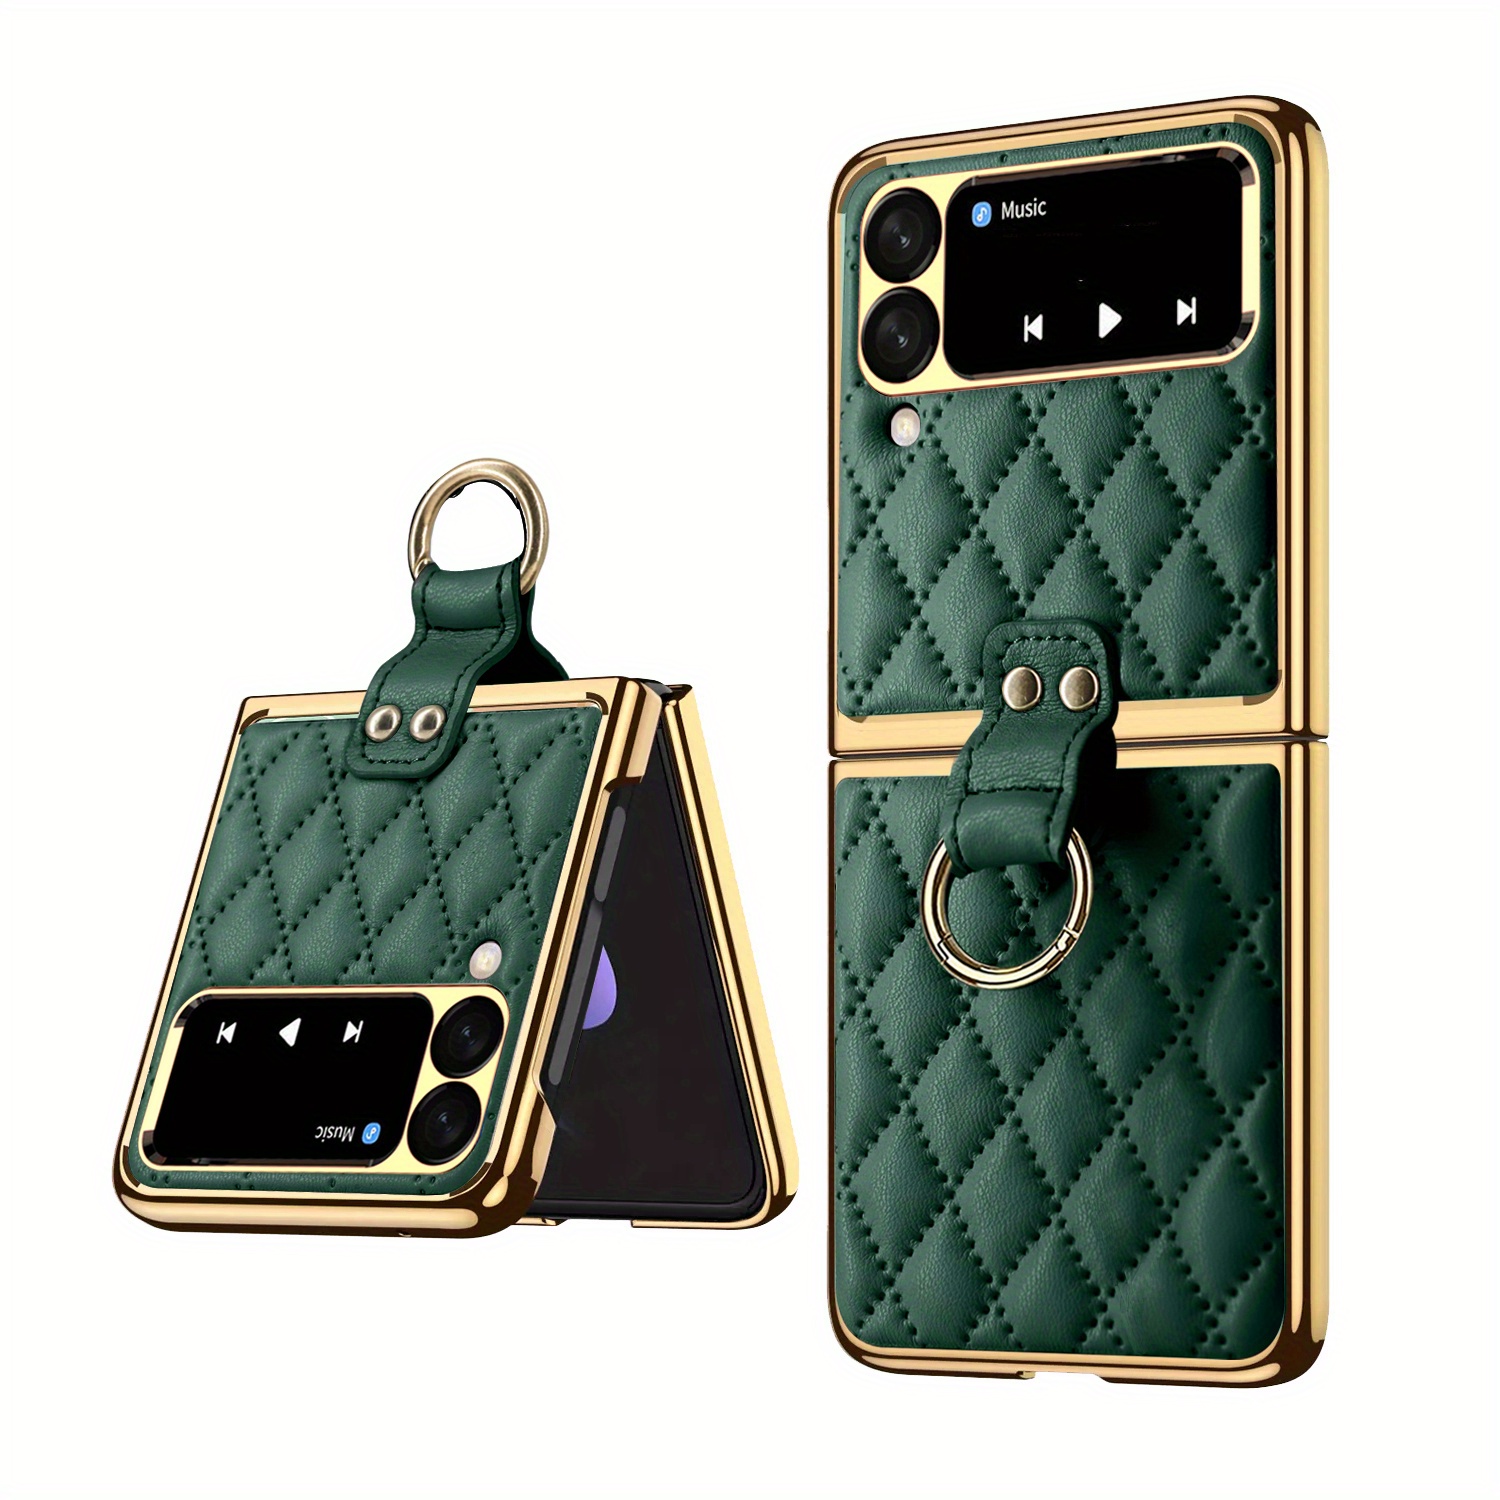 Samsung Leather Cover Galaxy Z Flip 3 Case Green